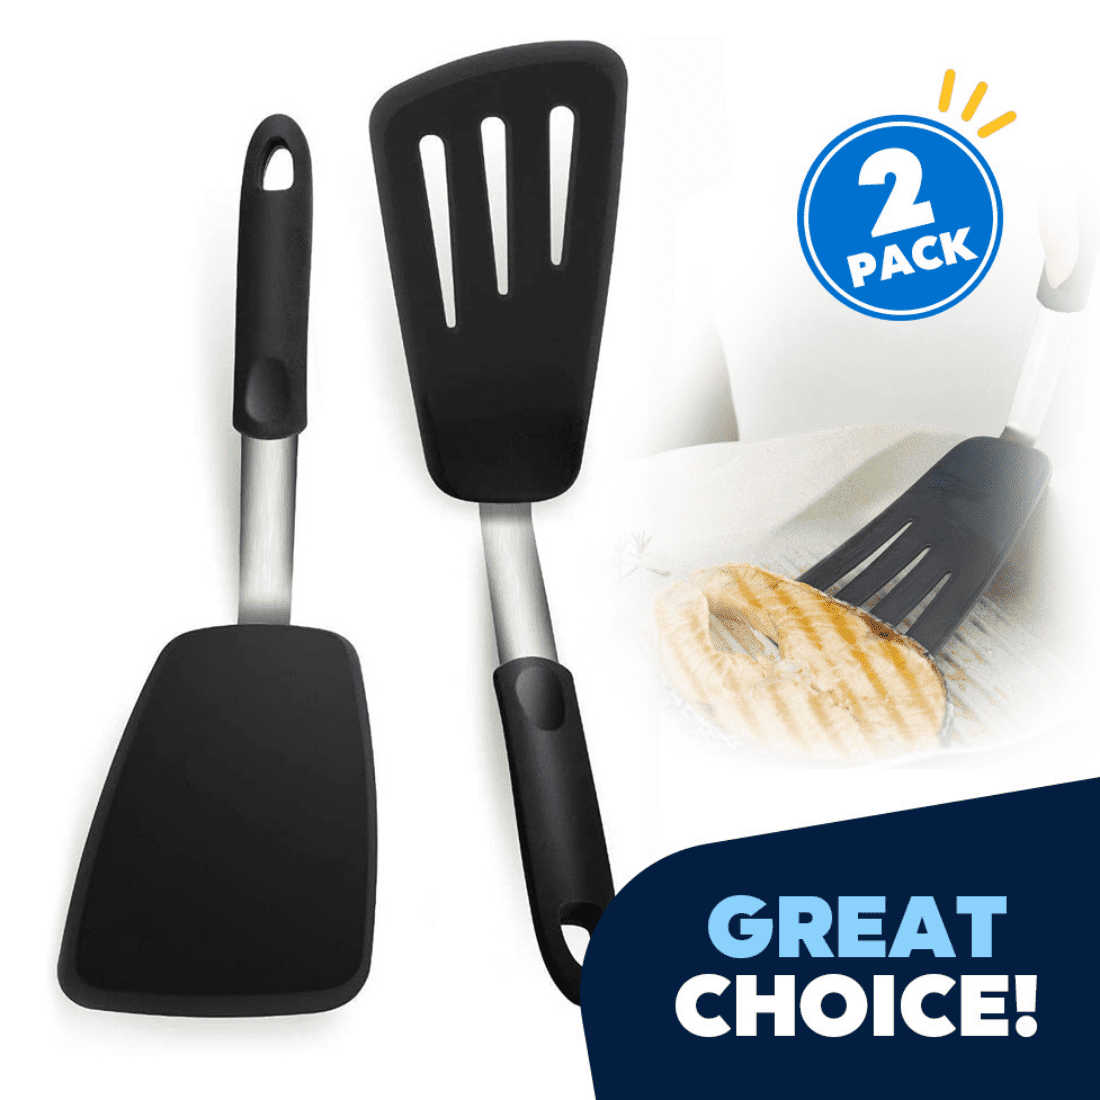 Flexible Kitchen Spatulas for Cooking and Grilling Daily Kitchen Spatula Set Heat Resistant Silicone and Stainless Steel 2-Piece Set Grill Turners Turner Spatulas Rubber Grip Egg Flippers 